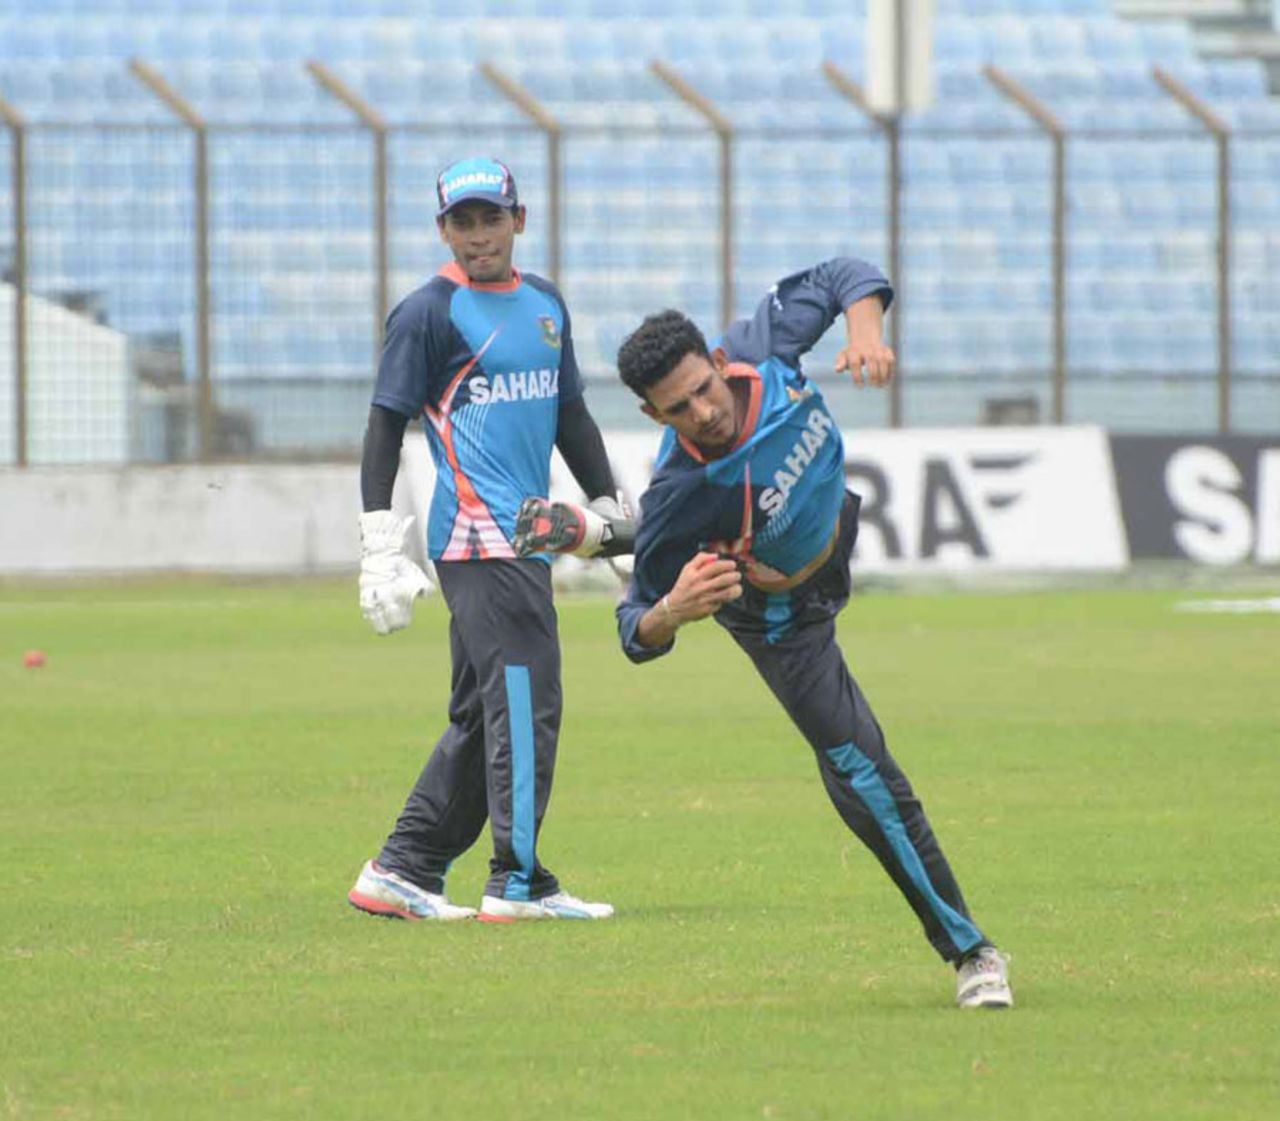 Nasir Hossain dives to take a catch at practice, Chittagong, October 8, 2013